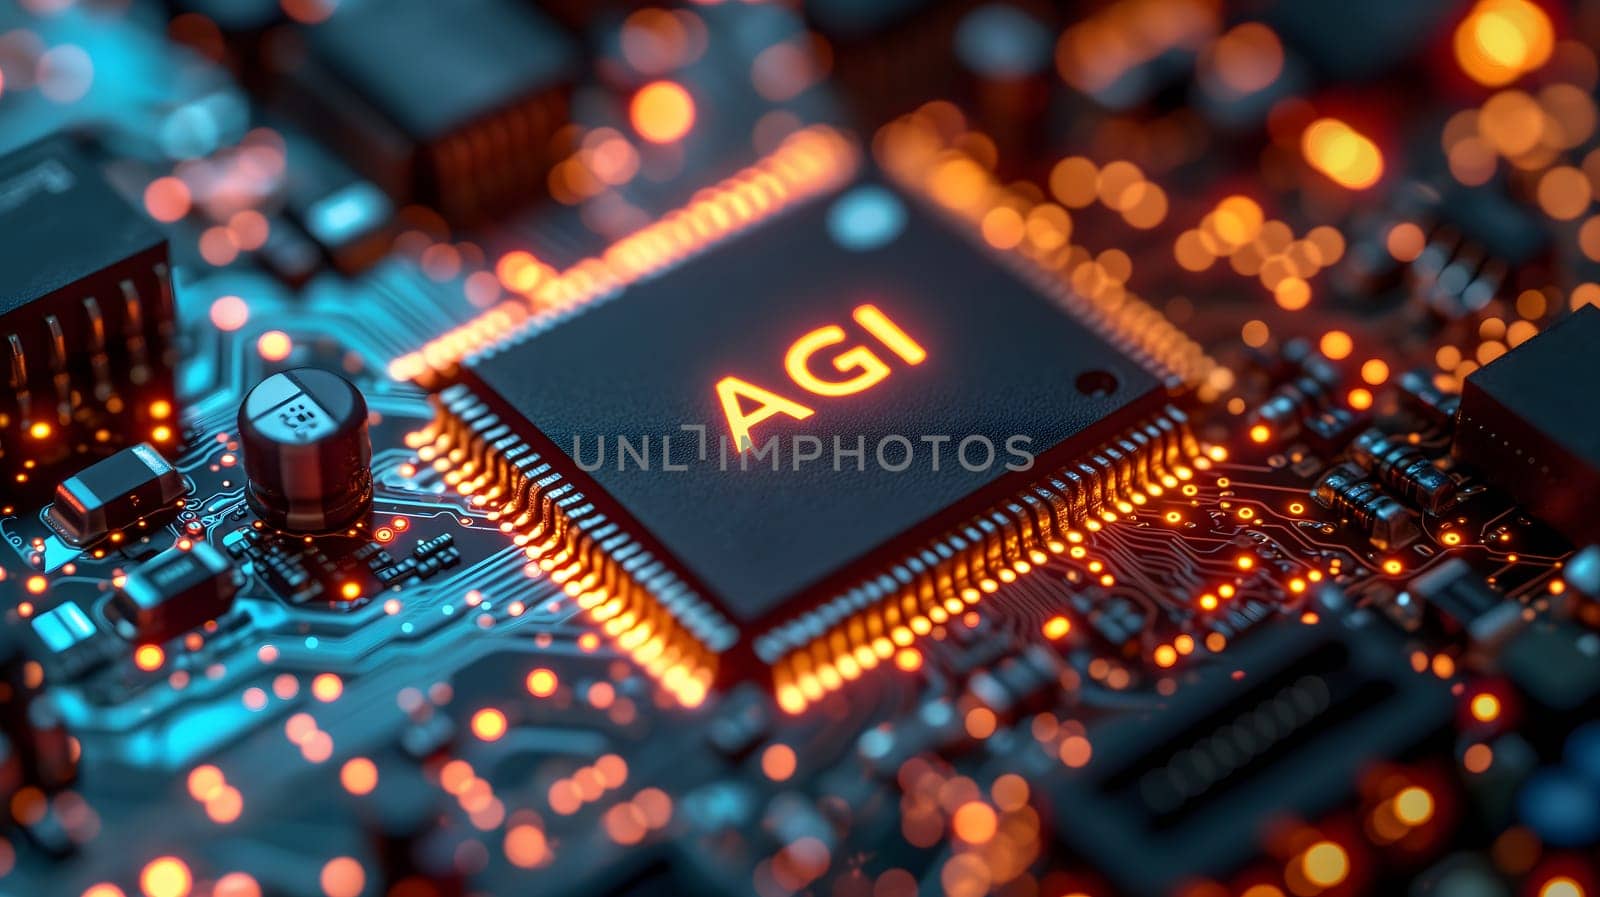 AGI - artificial general intelligence - microchip on black circuit board with orange glow, dedicated AI hardware concept